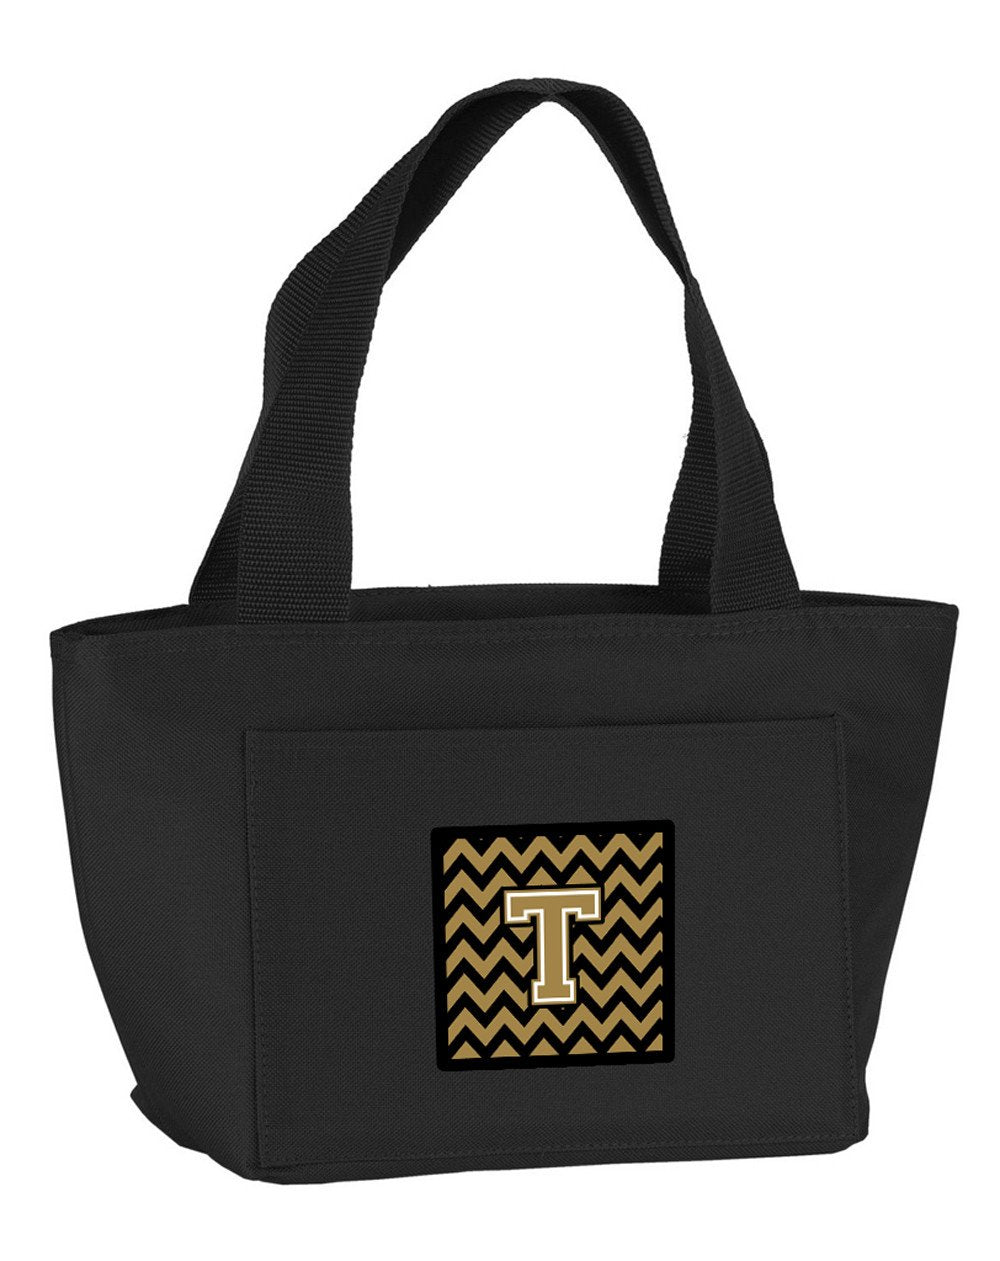 Letter T Chevron Black and Gold  Lunch Bag CJ1050-TBK-8808 by Caroline&#39;s Treasures